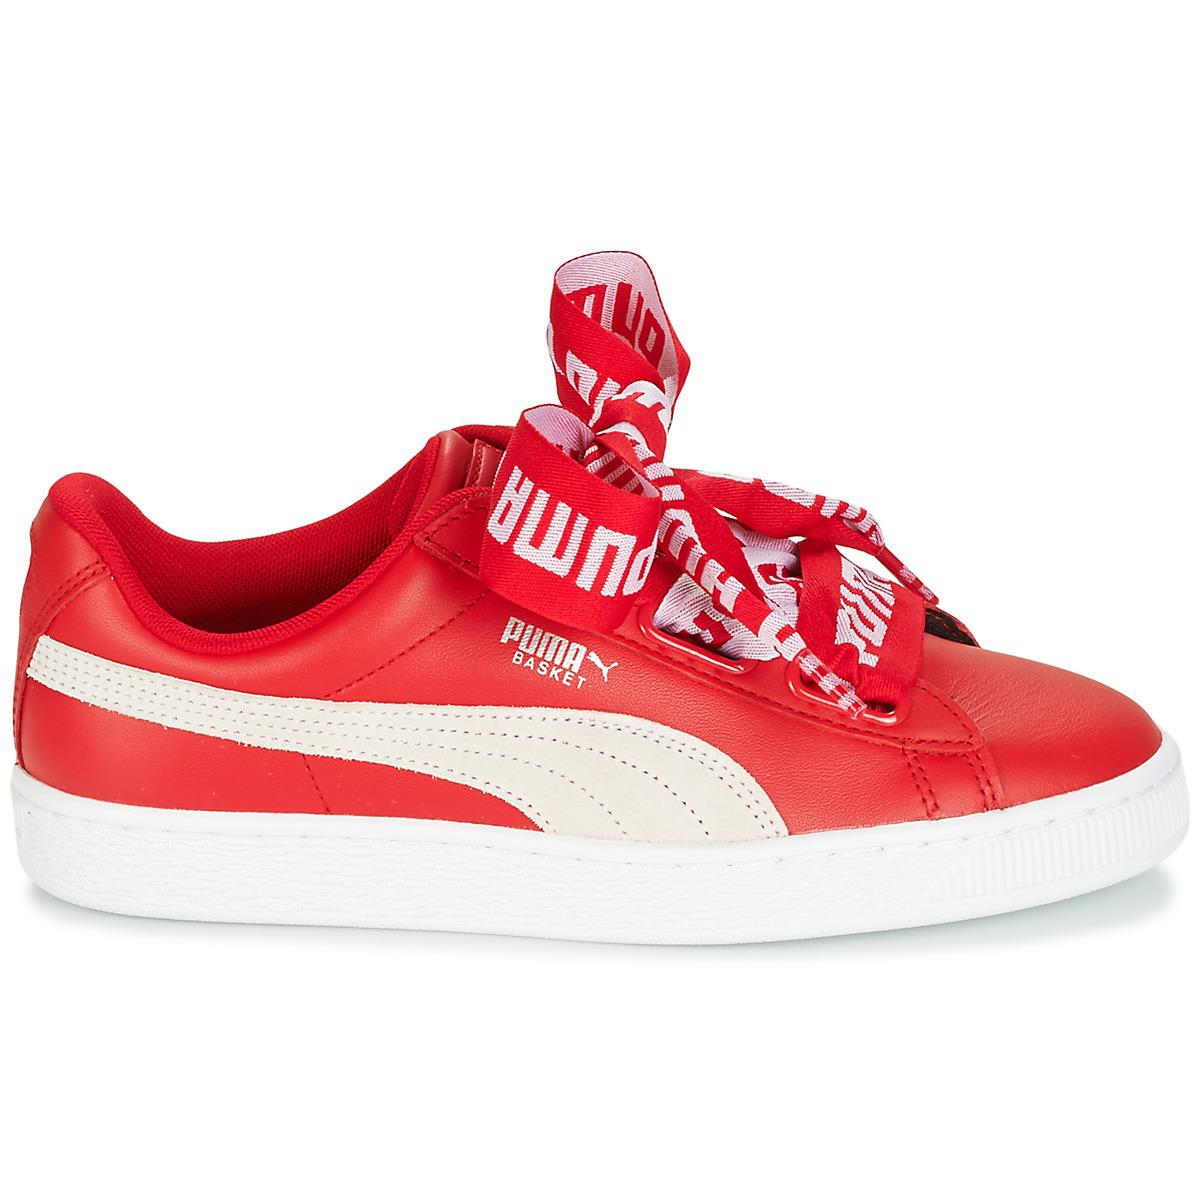 PUMA Trainers in Red/White (Red) - Lyst